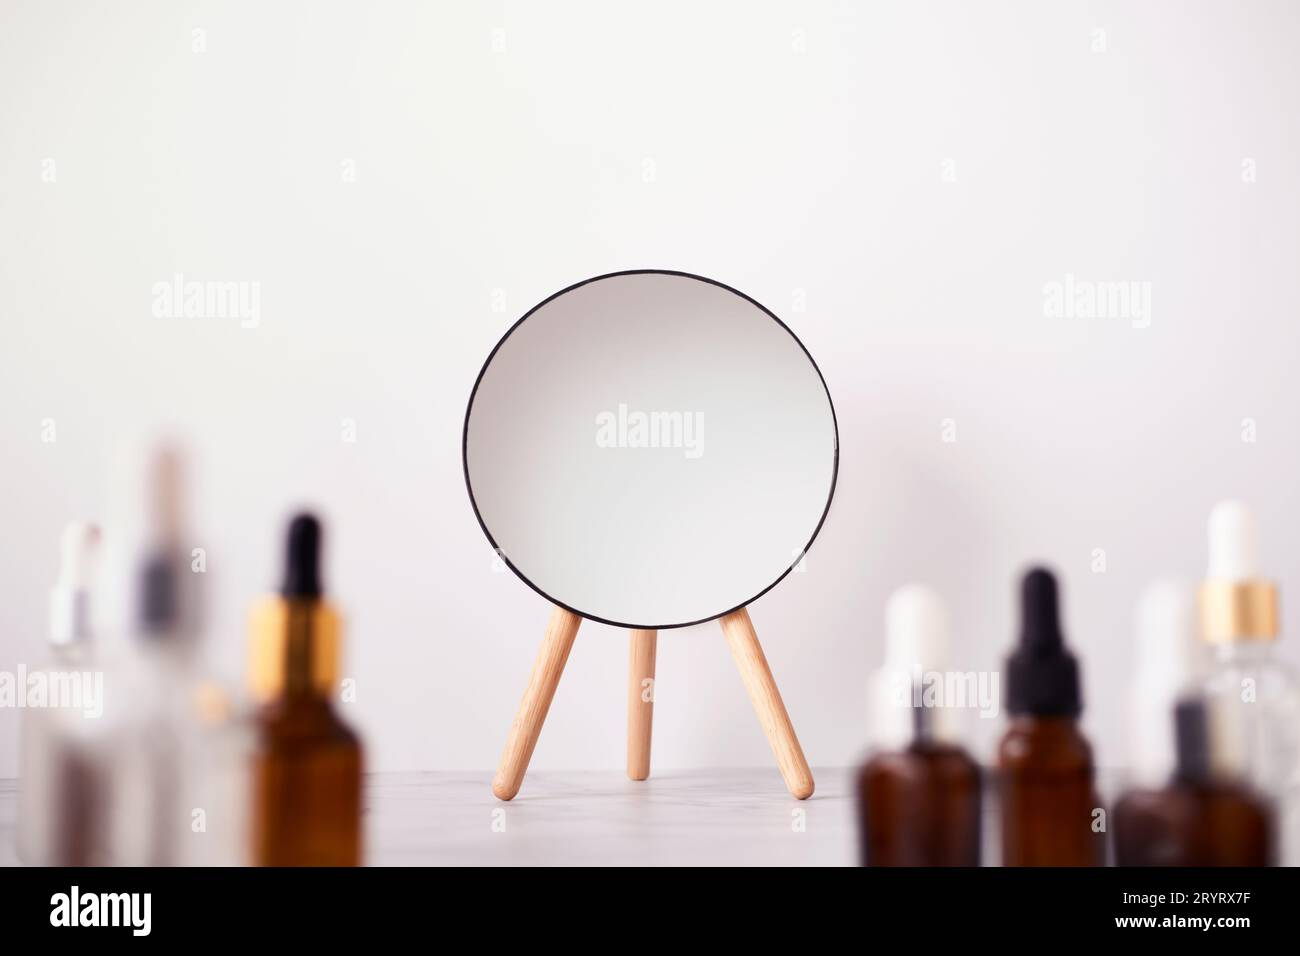 Serum or Liquid Collagen Bottles and mirror on marble table. Anti age beauty Cosmetics products concept, selective focus Stock Photo